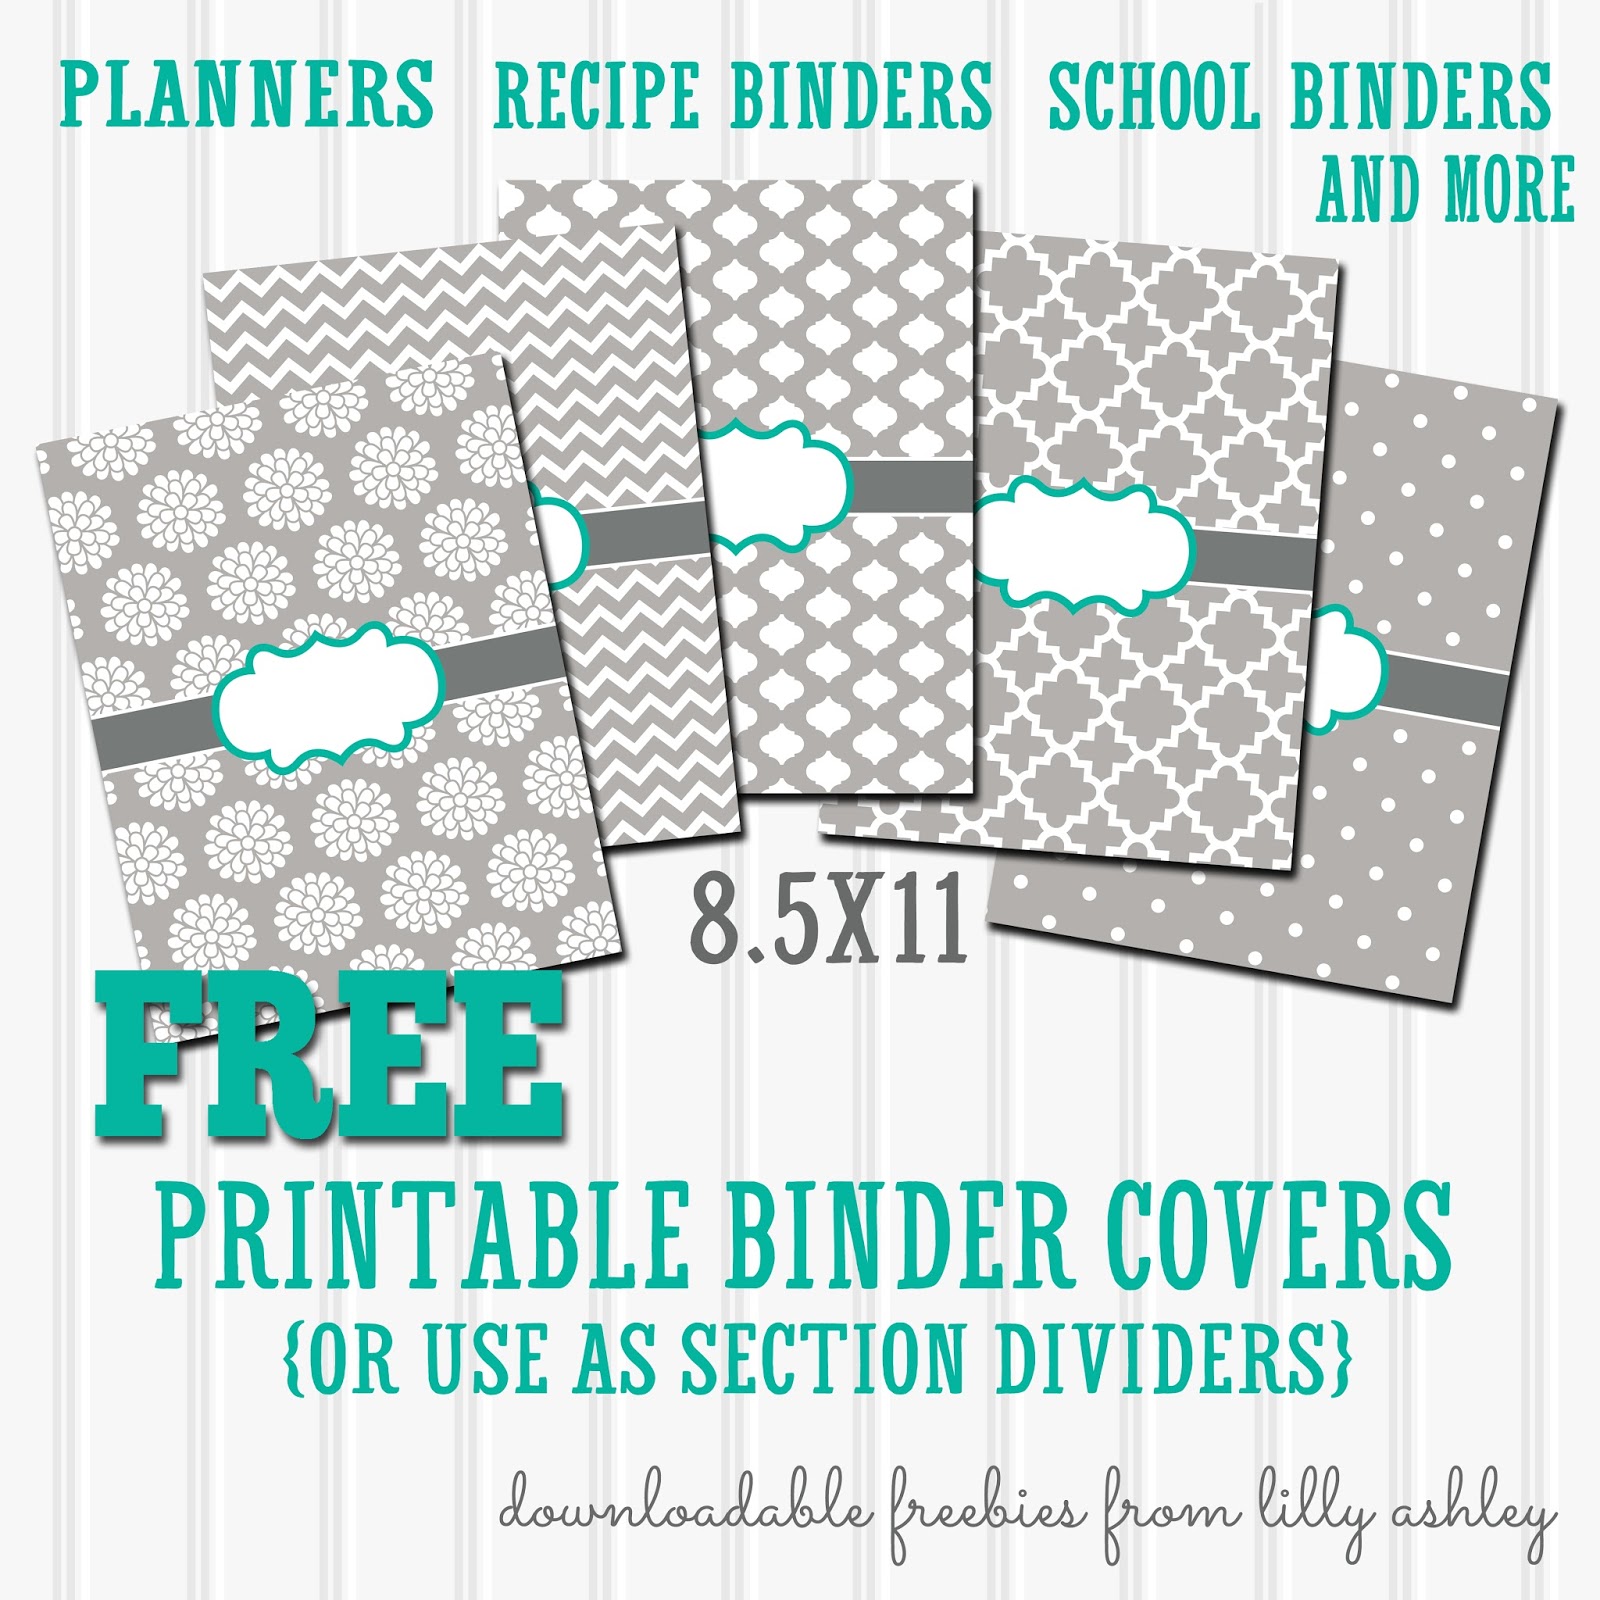 make-it-create-by-lillyashley-freebie-downloads-free-binder-covers-printable-set